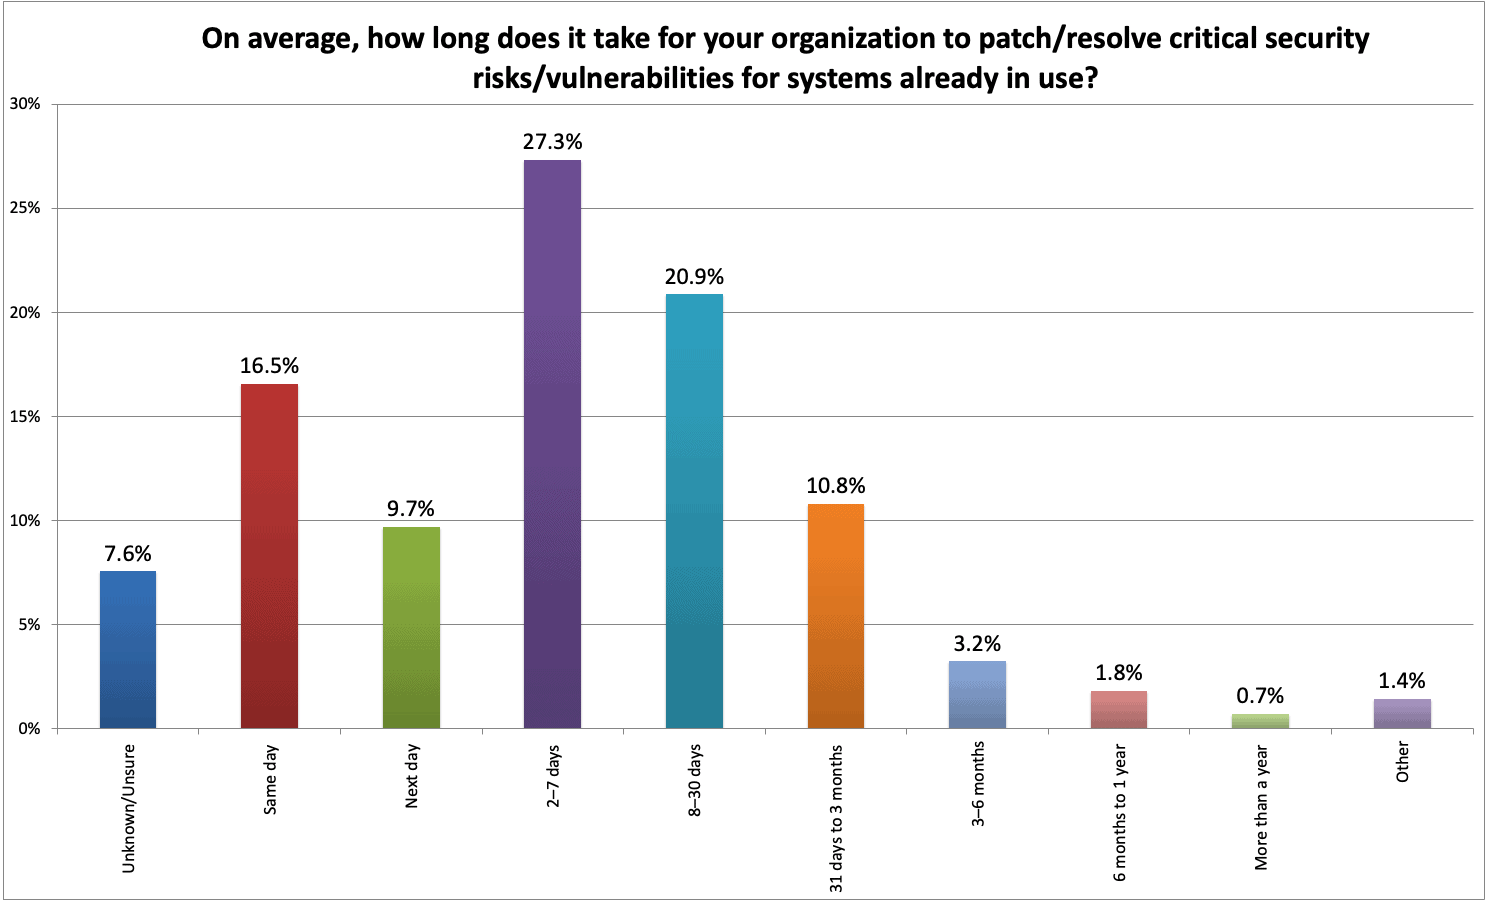 Bar chart showing on average, around 27.3% of organization take 2-7 days to patch/resolve critical security risks/vulnerabilities for systems already in use